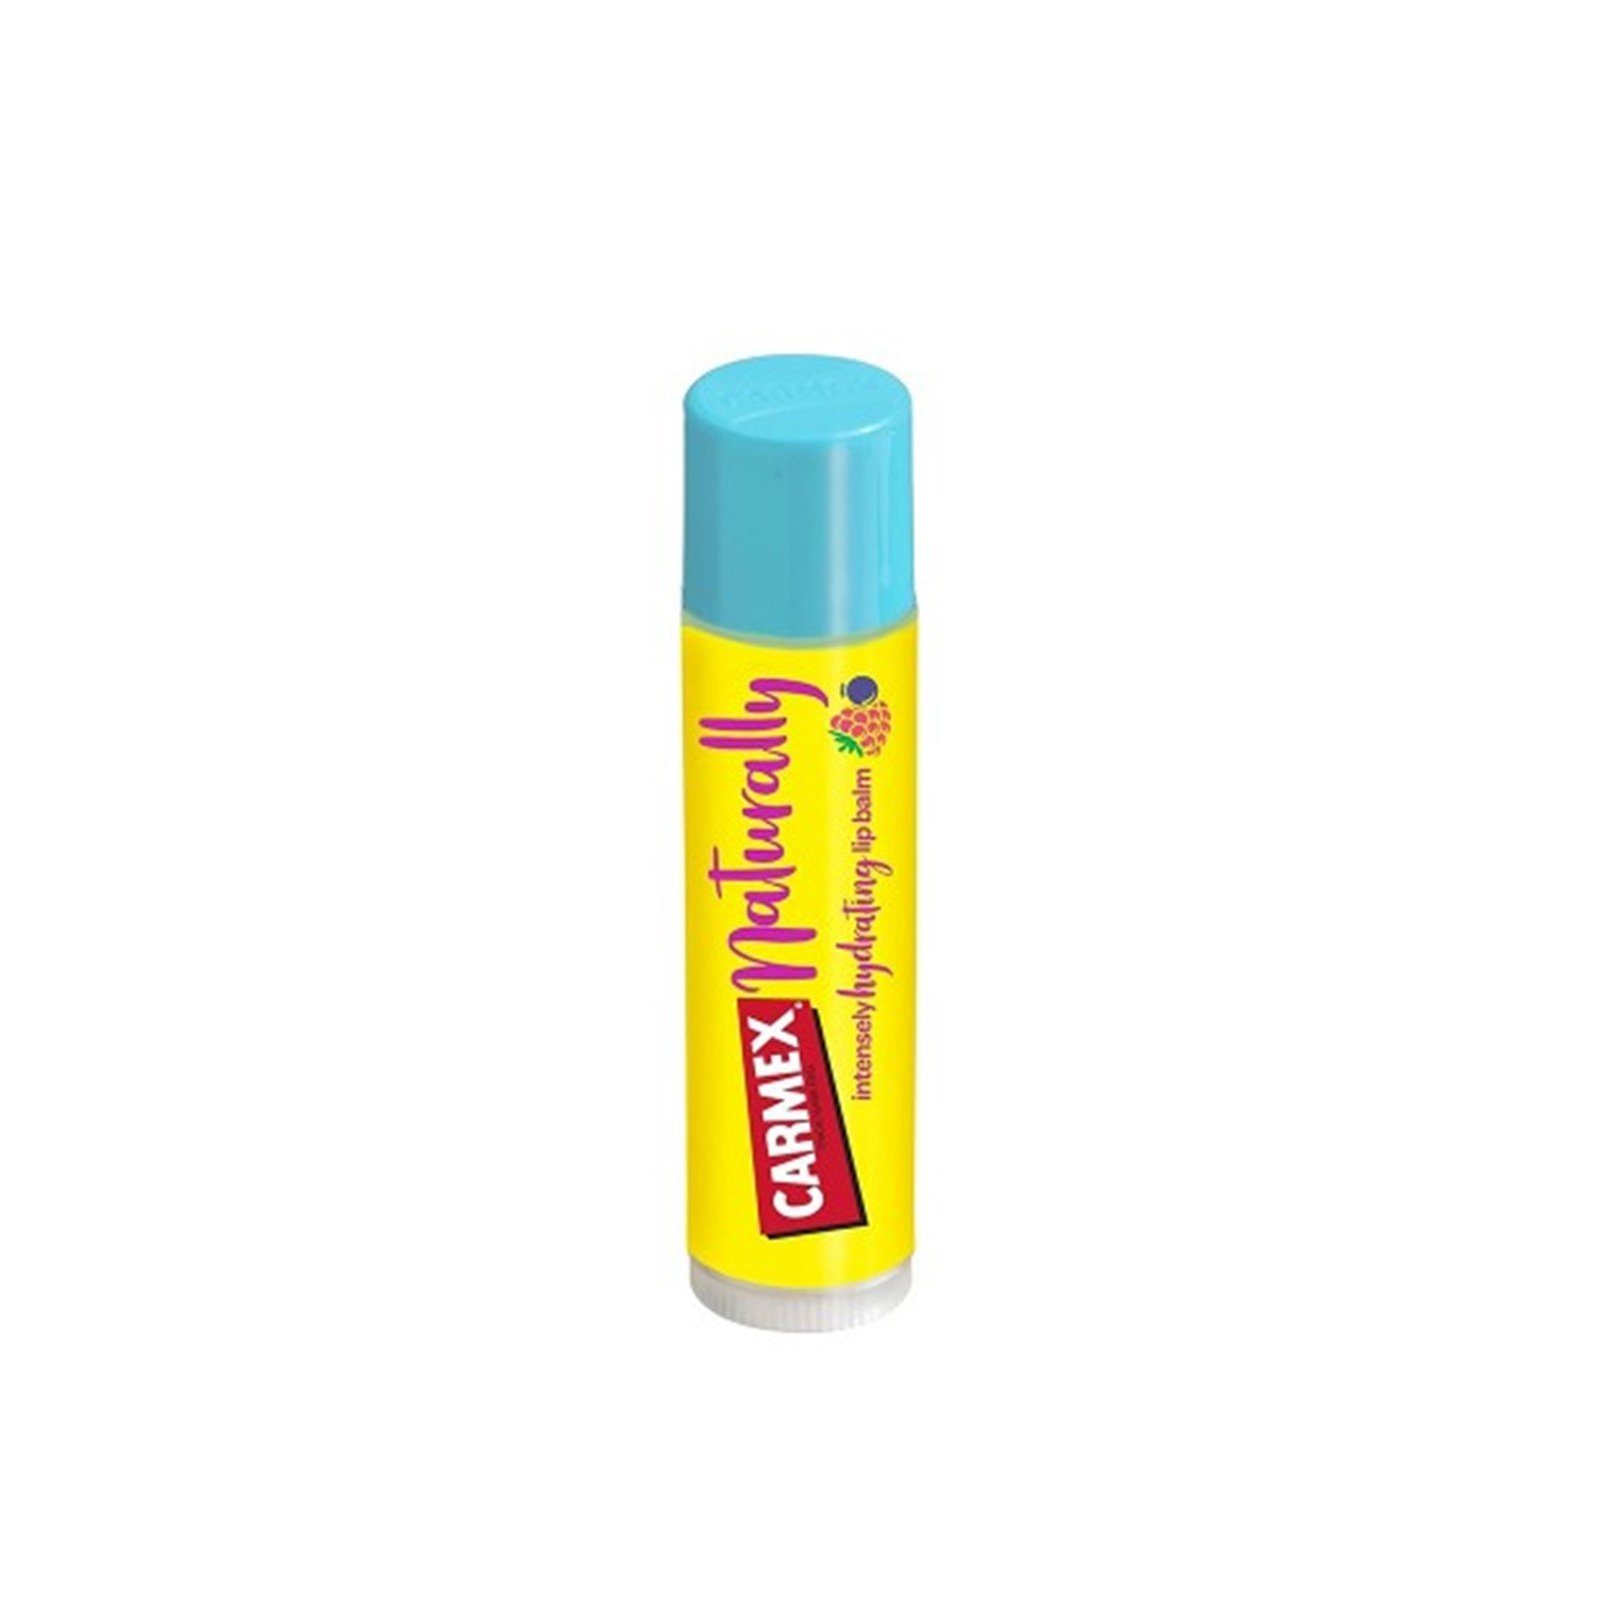 Carmex Naturally Intensely Hydrating Lip Balm Berry 4.25g (0.14 oz)